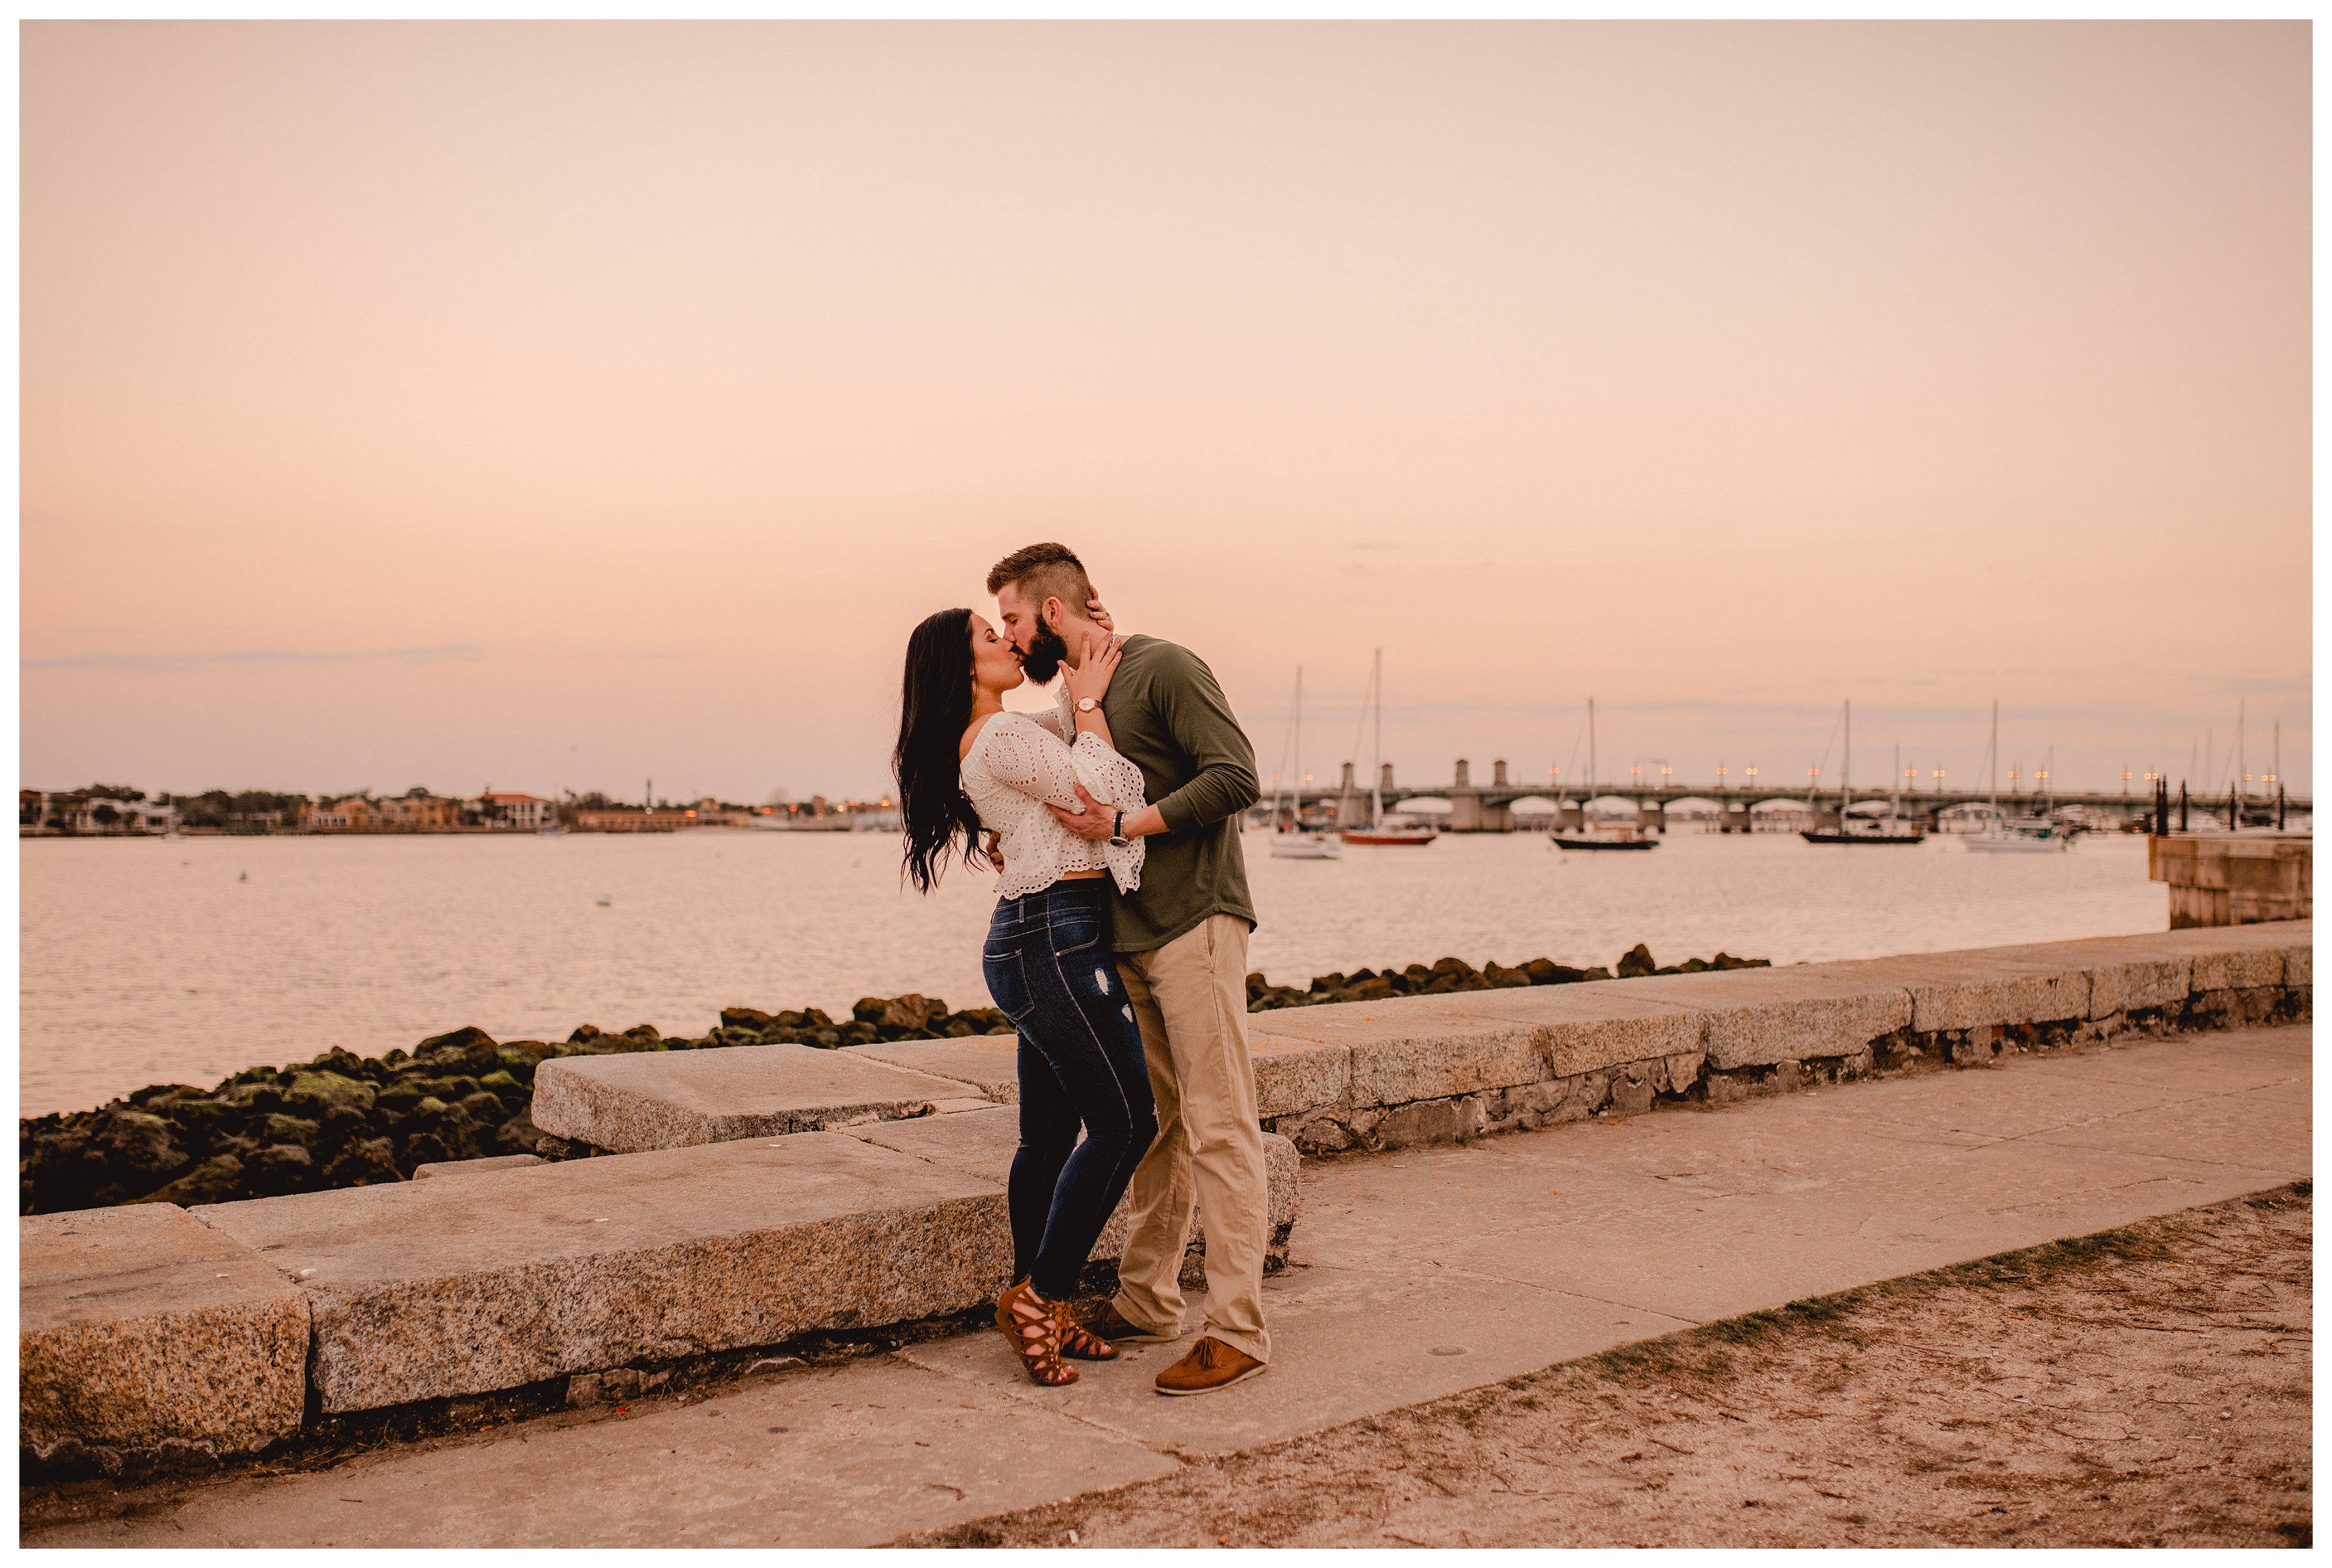 Intimate engagement session near the ocean by professional photographer in Florida. Shelly Williams Photography